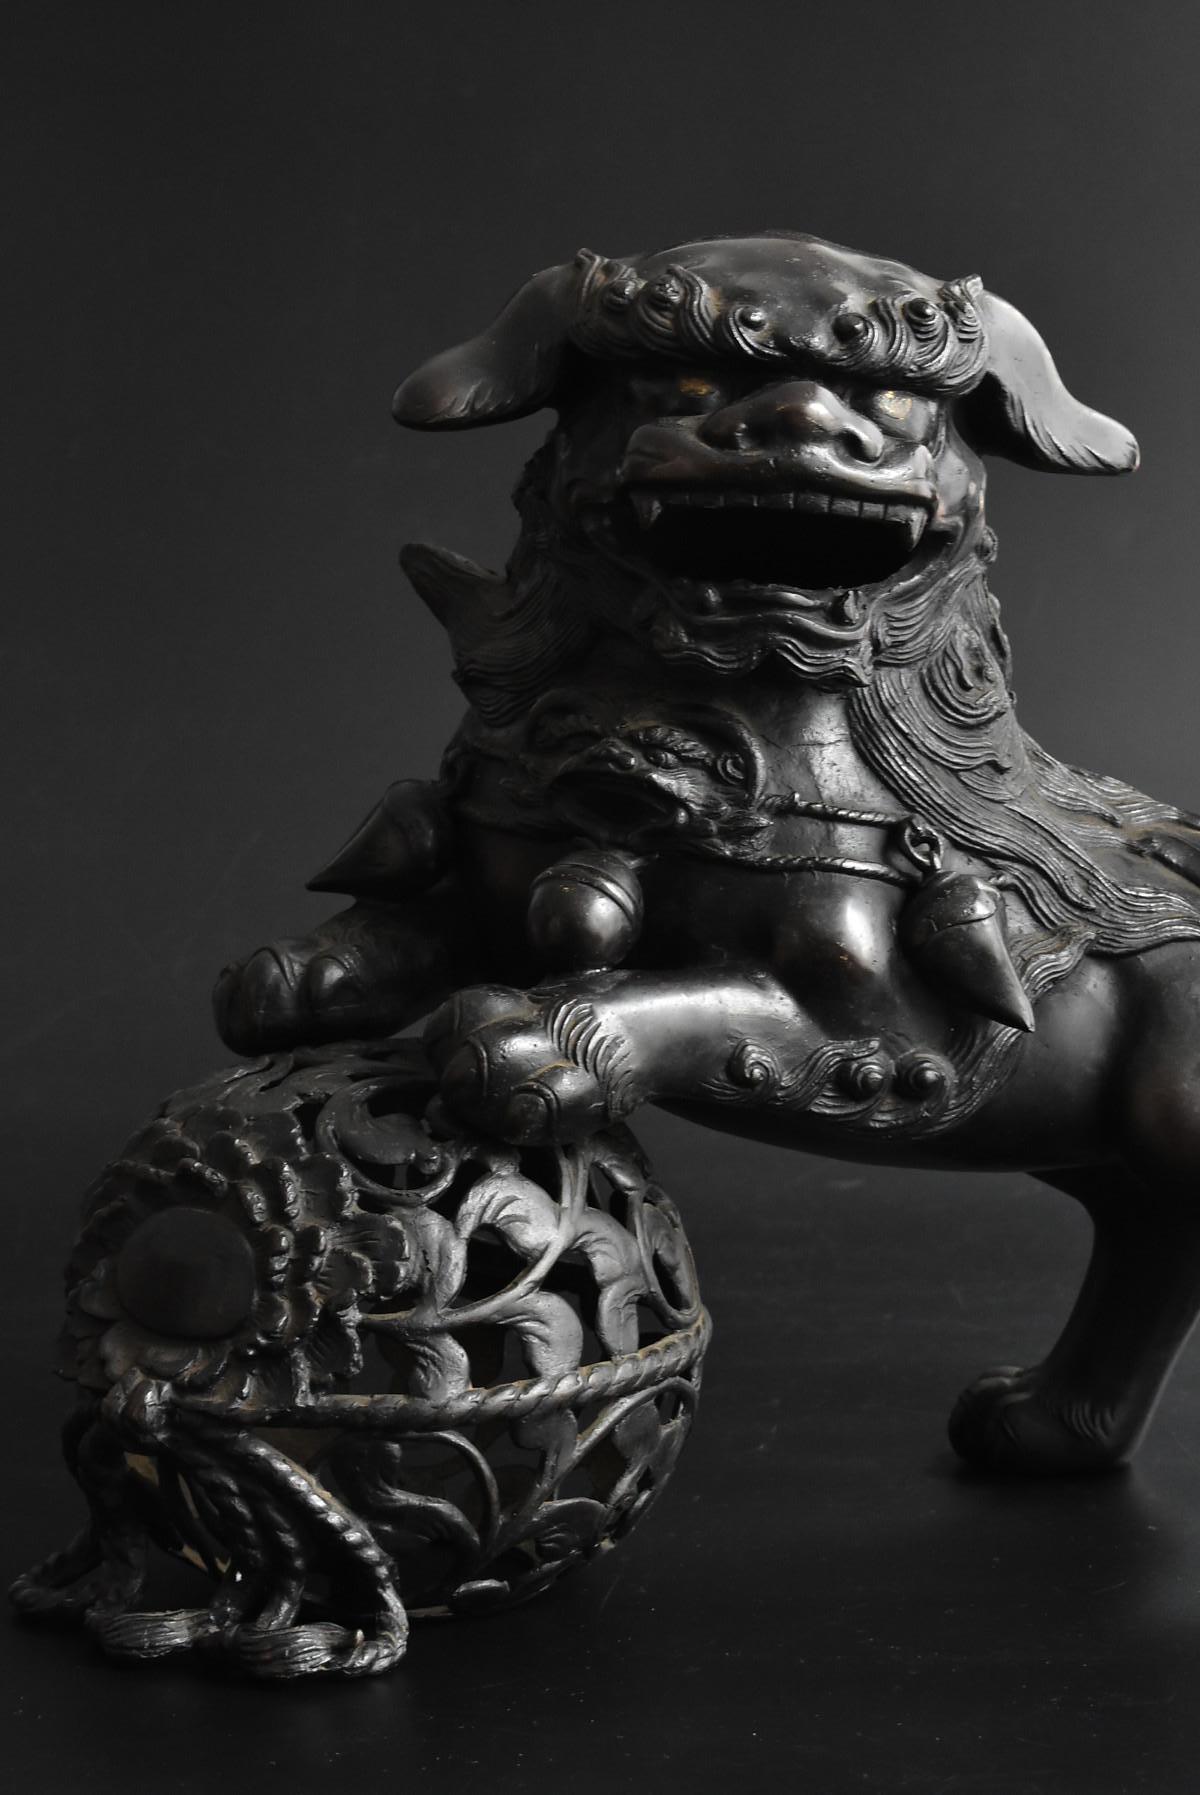 An old Japanese brass lion figurine.
It's big and very powerful.
The round thing at the foot of the lion is a peony.
It is a Temari with a peony pattern. (ball)

The lion symbolizes majestic strength, and the peony means gorgeous.
This